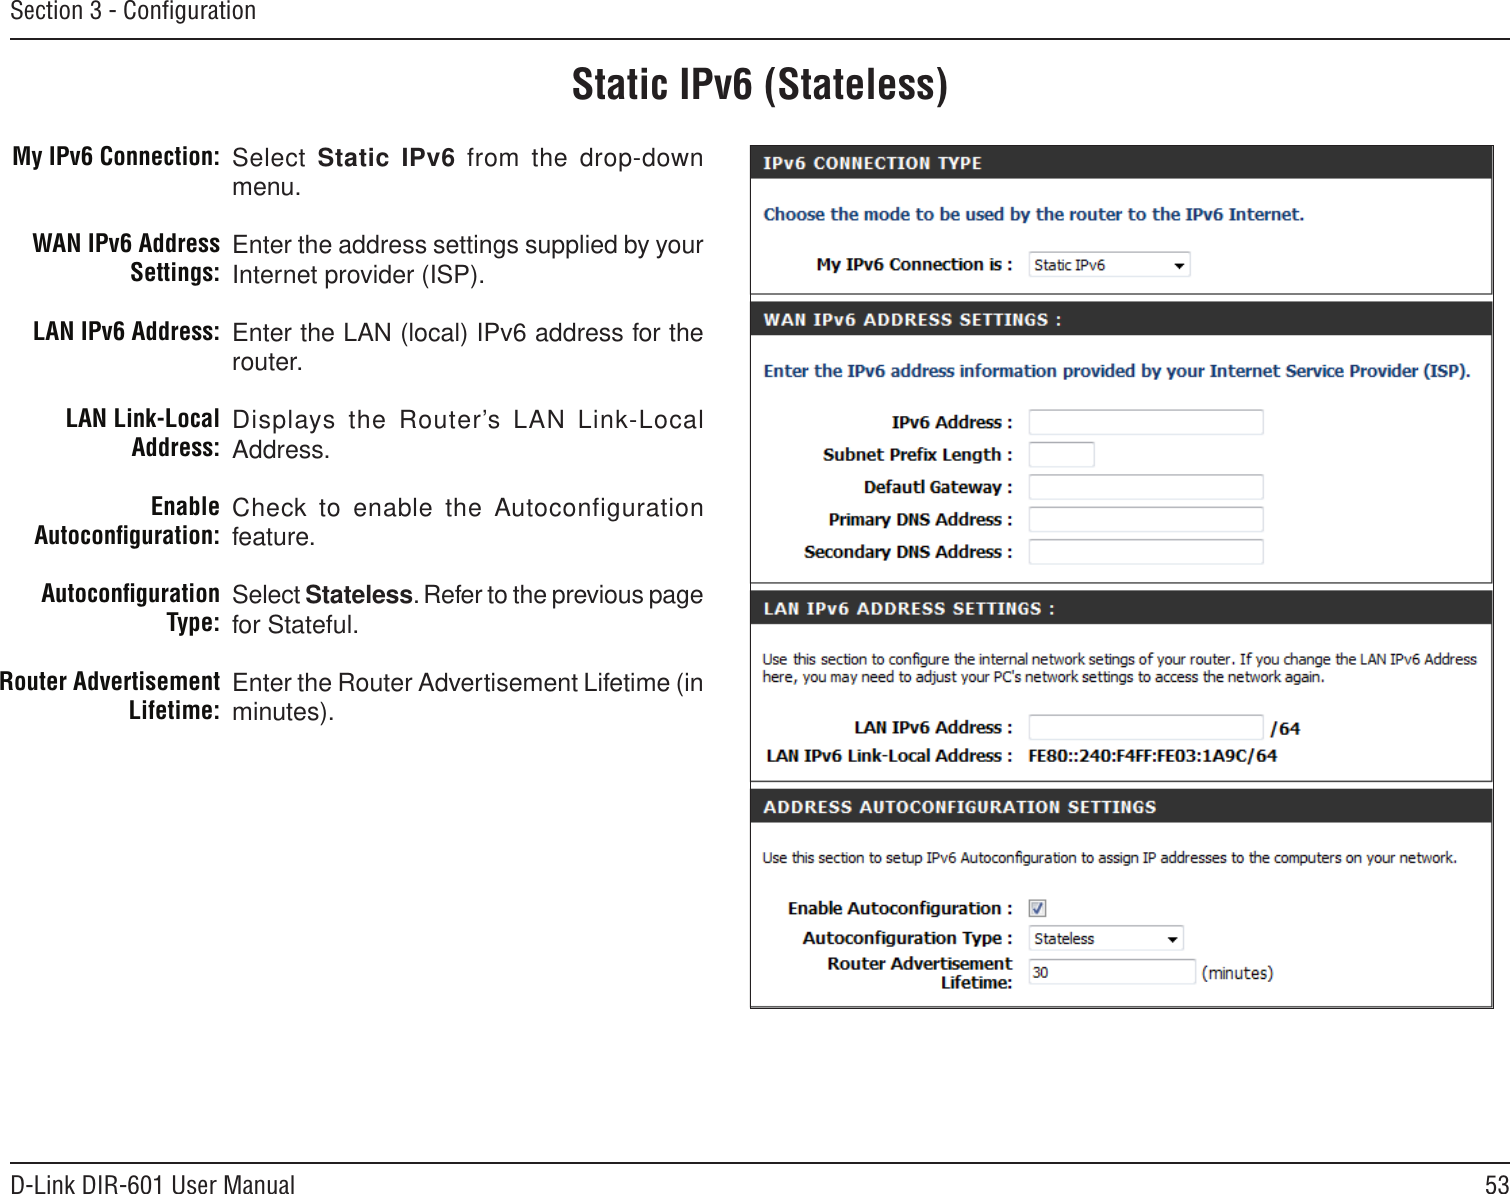 53D-Link DIR-601 User ManualSection 3 - ConﬁgurationStatic IPv6 (Stateless)Select Static IPv6 from the  drop-down menu.Enter the address settings supplied by your Internet provider (ISP). Enter the LAN (local) IPv6 address for the router. Displays the Router’s LAN  Link-Local Address.Check to enable the Autoconfiguration feature.Select Stateless. Refer to the previous page for Stateful.Enter the Router Advertisement Lifetime (in minutes).My IPv6 Connection:WAN IPv6 Address Settings:LAN IPv6 Address:LAN Link-Local Address:Enable Autoconﬁguration:Autoconﬁguration Type:Router Advertisement  Lifetime: